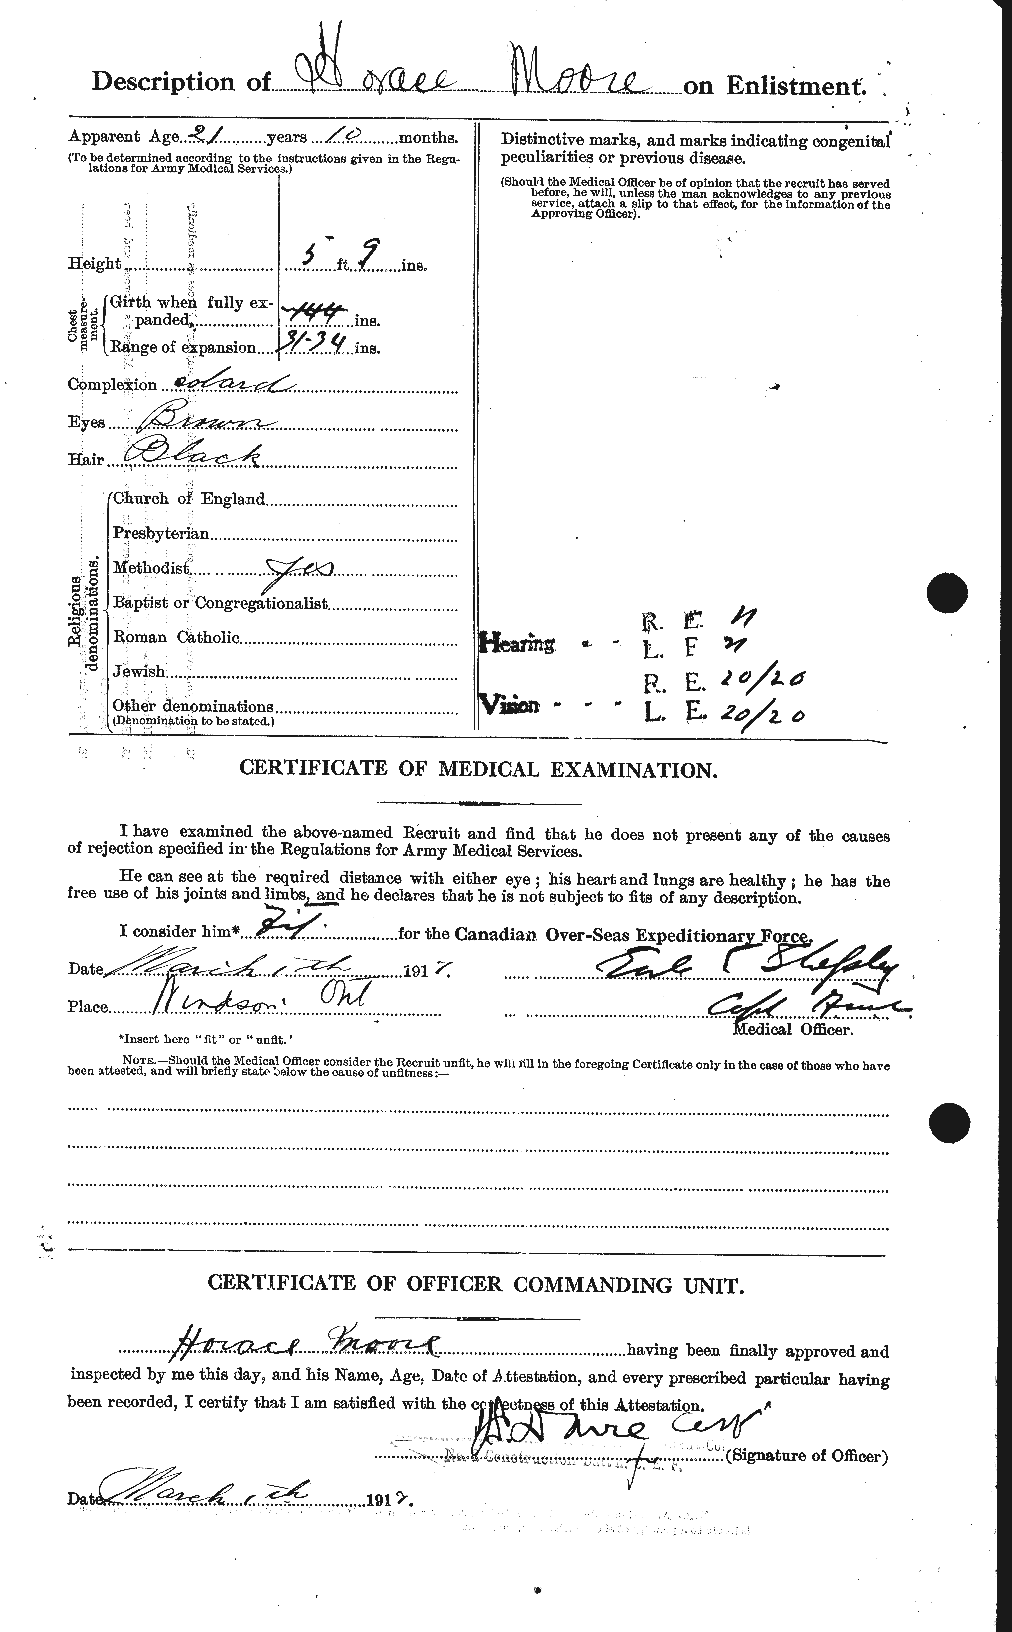 Personnel Records of the First World War - CEF 502132b